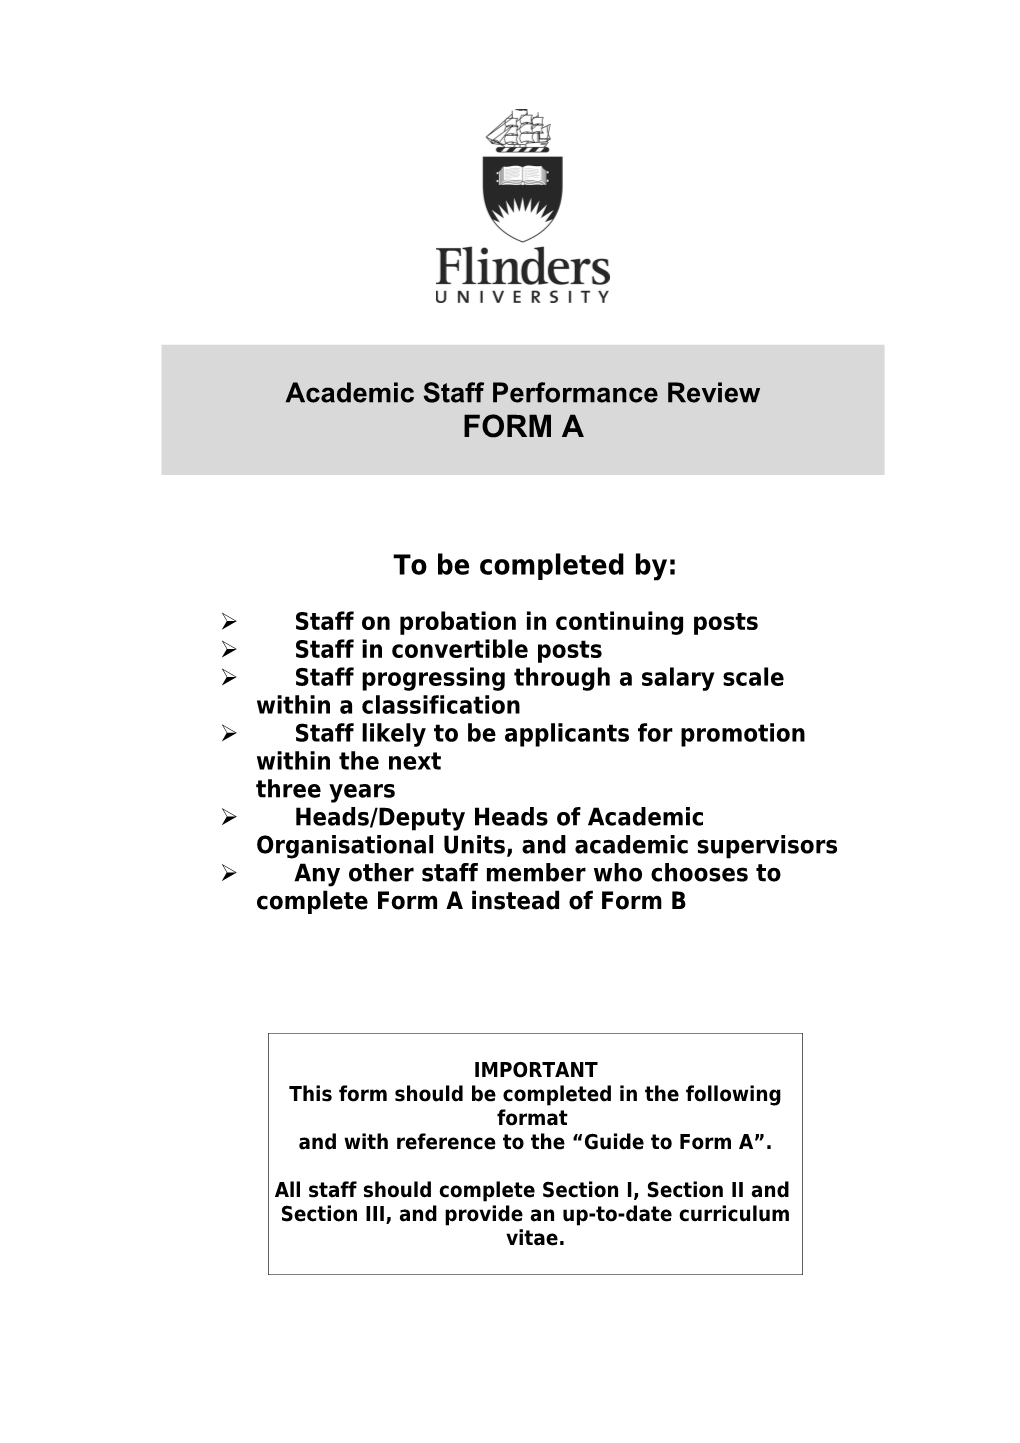 Academic Staff Performance Review